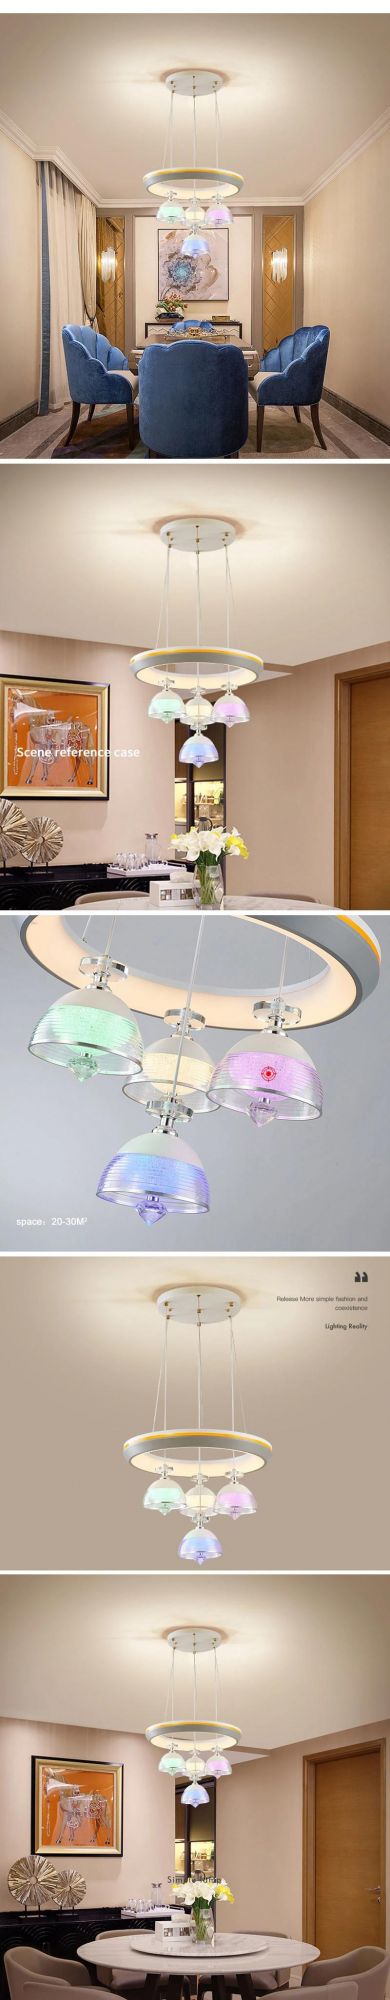 Afica Style Colorful LED Pendant Light Home Living Room Hanging Drop Modern Lamp